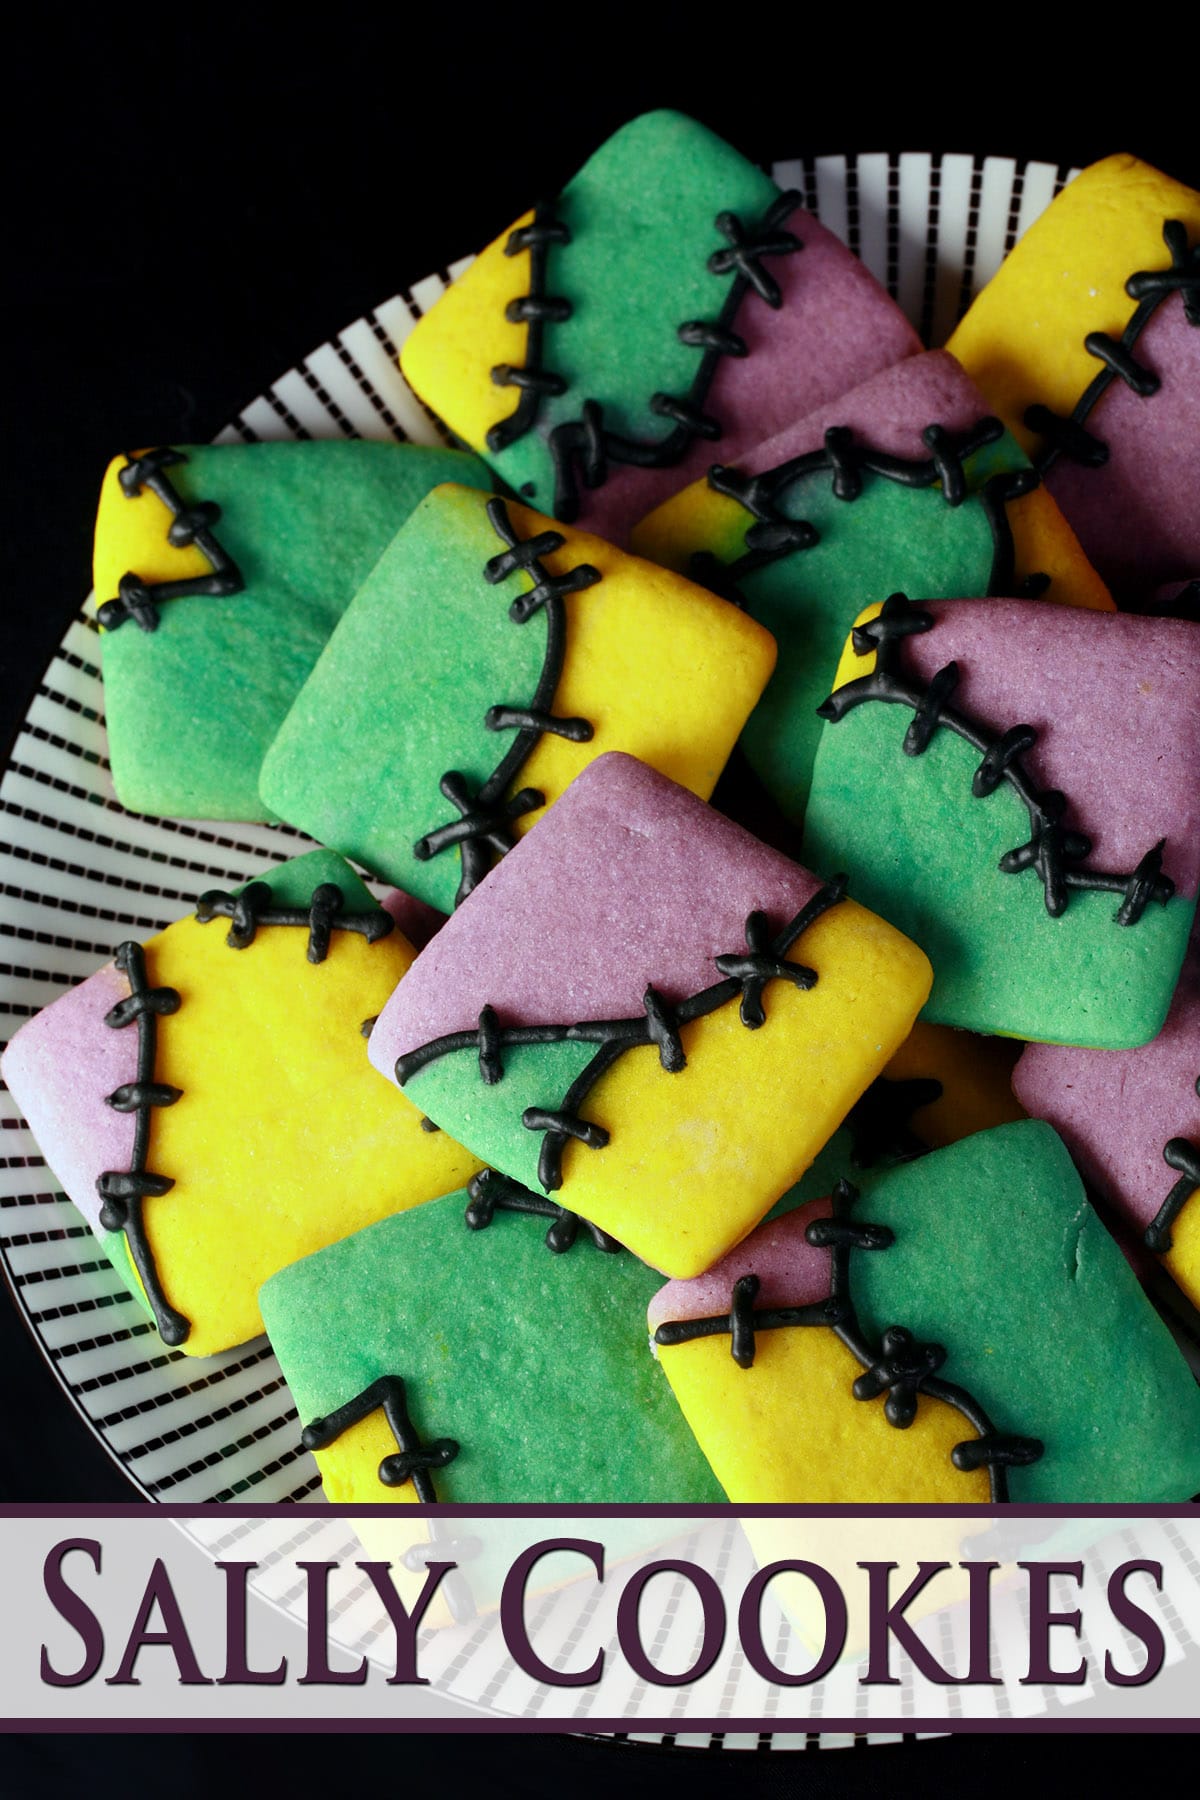 A plate of Sally cookies - random patches of purple, teal, and yellow cookie dough with frosting stitches.